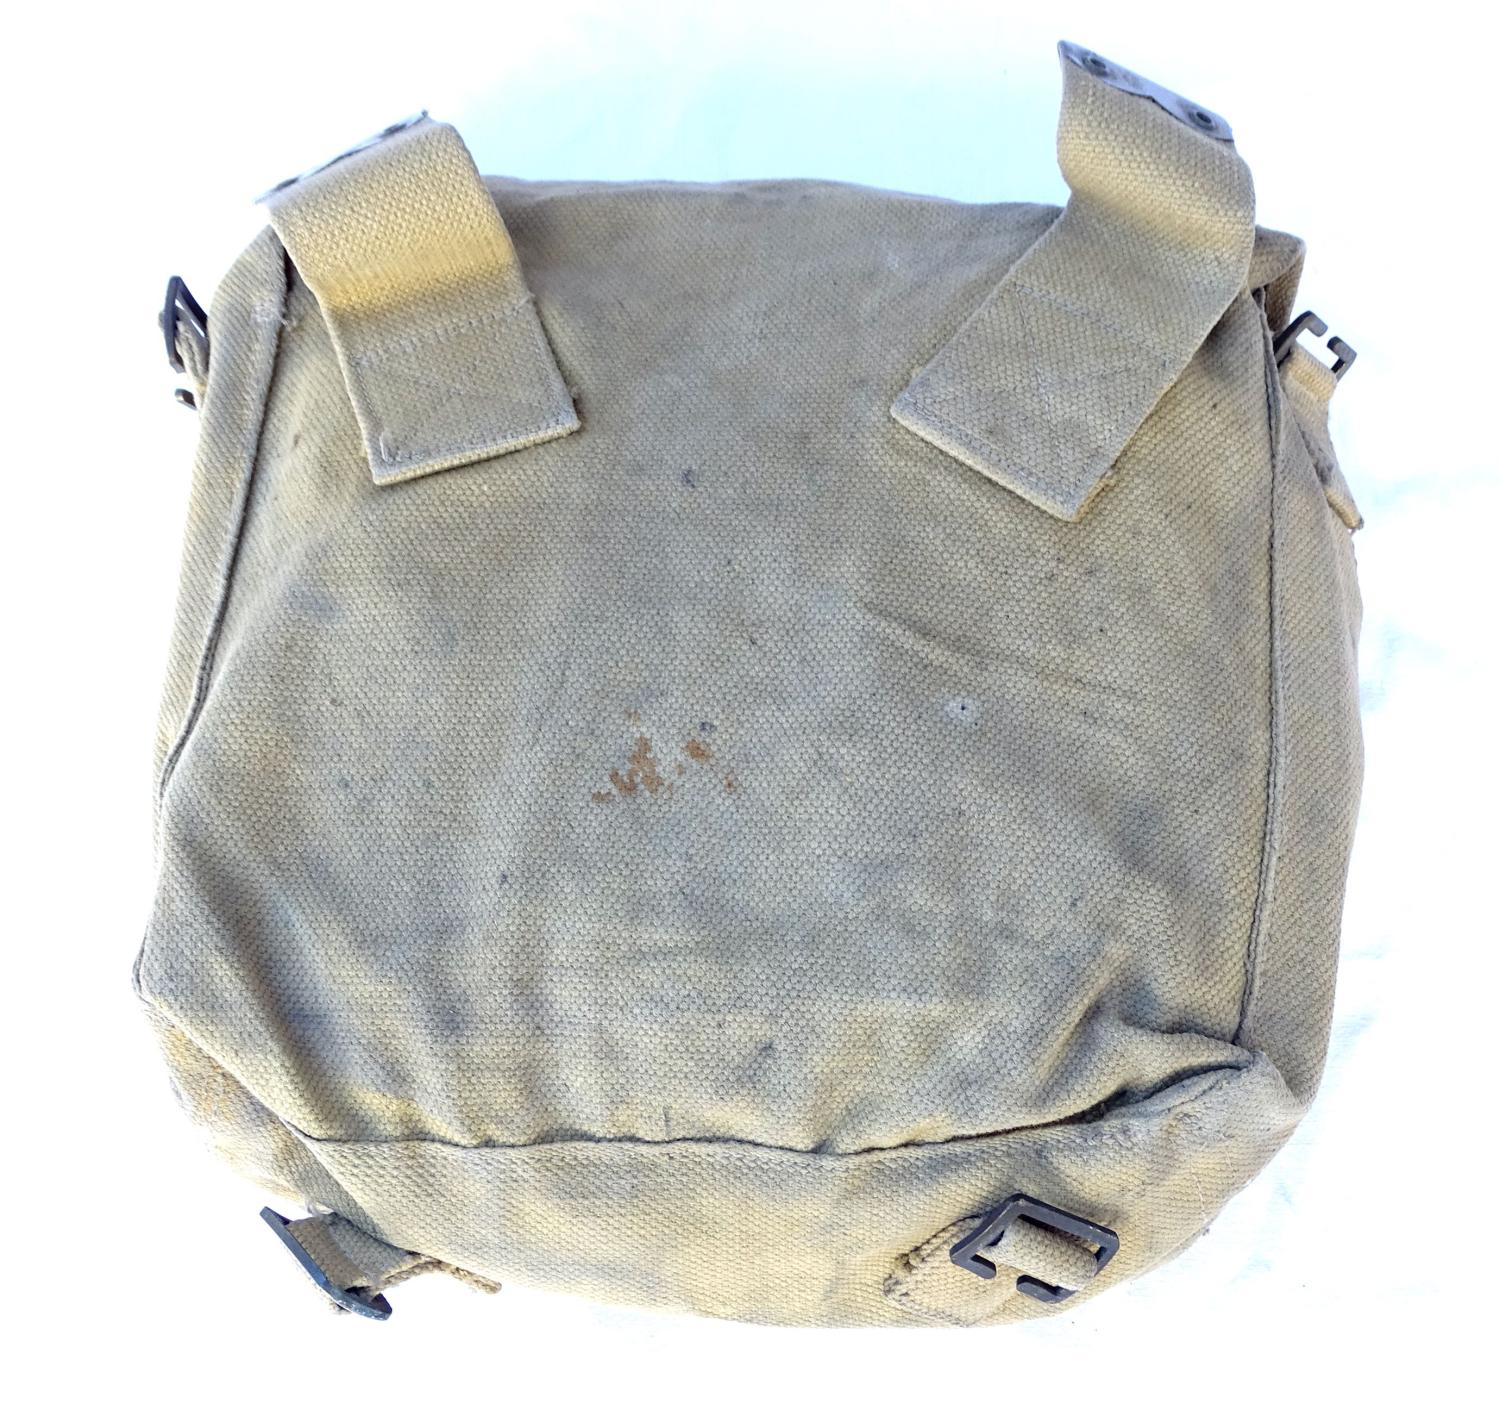 Small pack nomed Canada  WW2